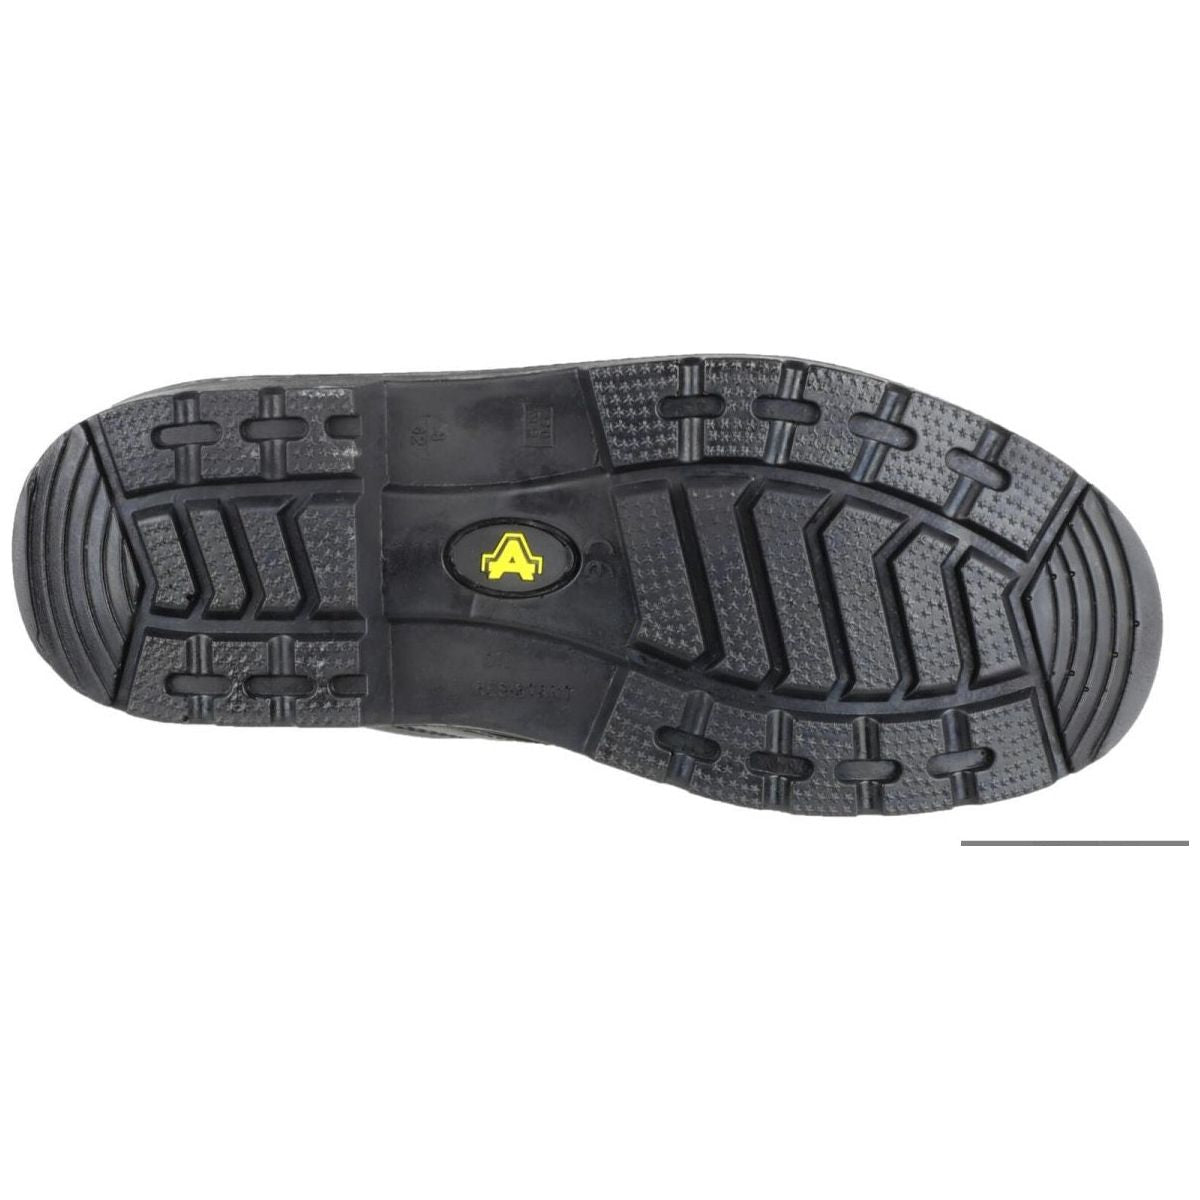 Amblers Fs38C Composite Gibson Safety Shoes Mens - workweargurus.com